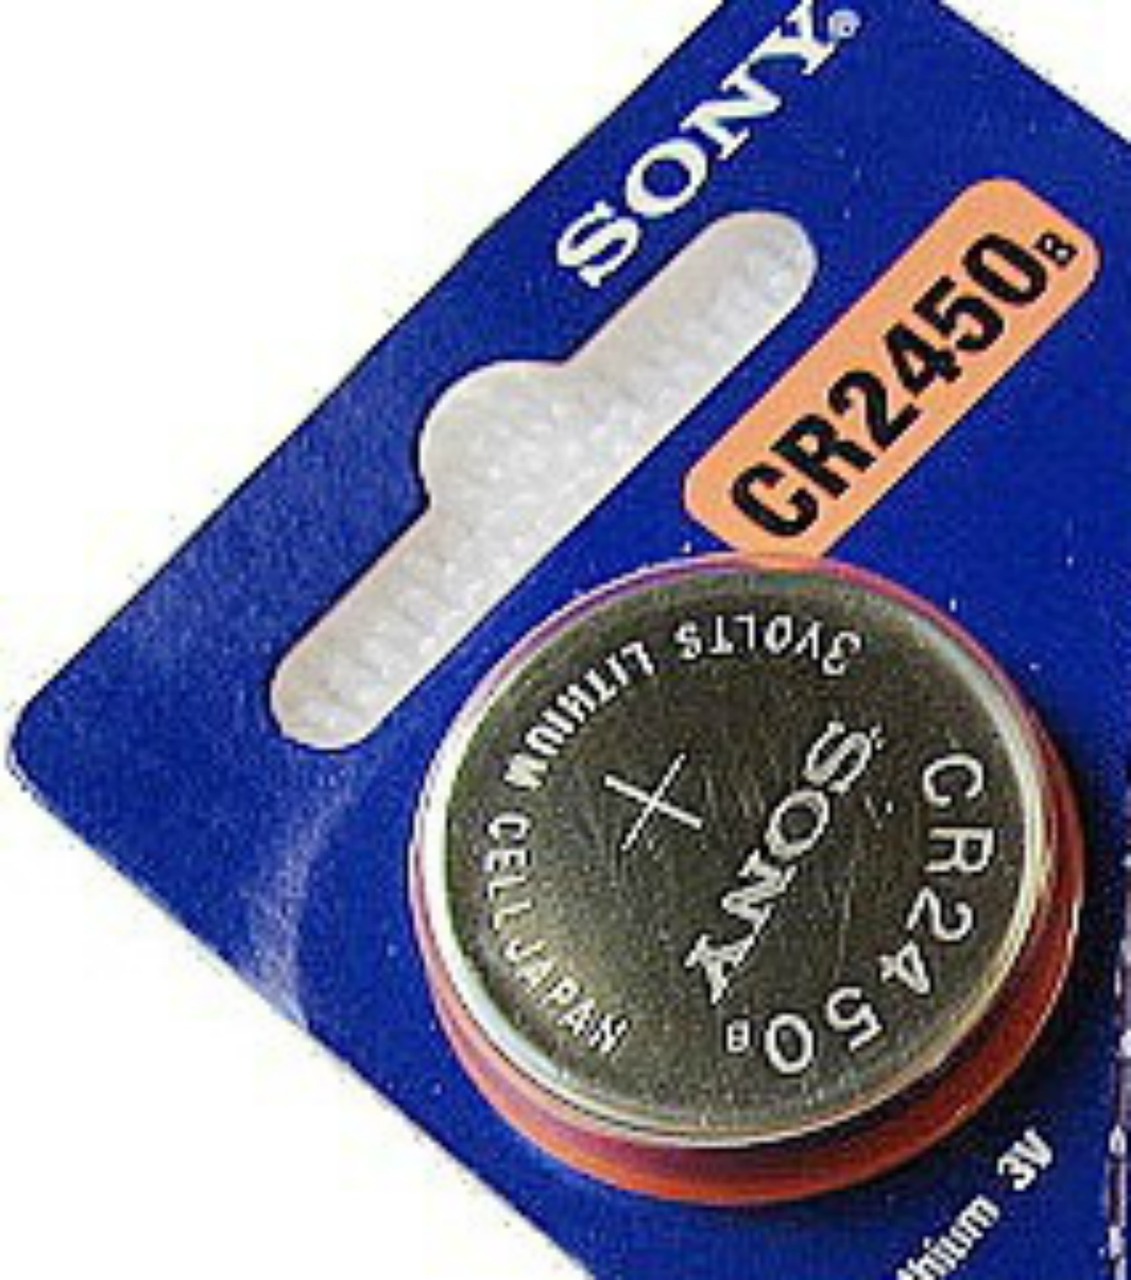 Sony CR2450 3V Lithium Coin Battery - 1 Pack - FREE SHIPPING